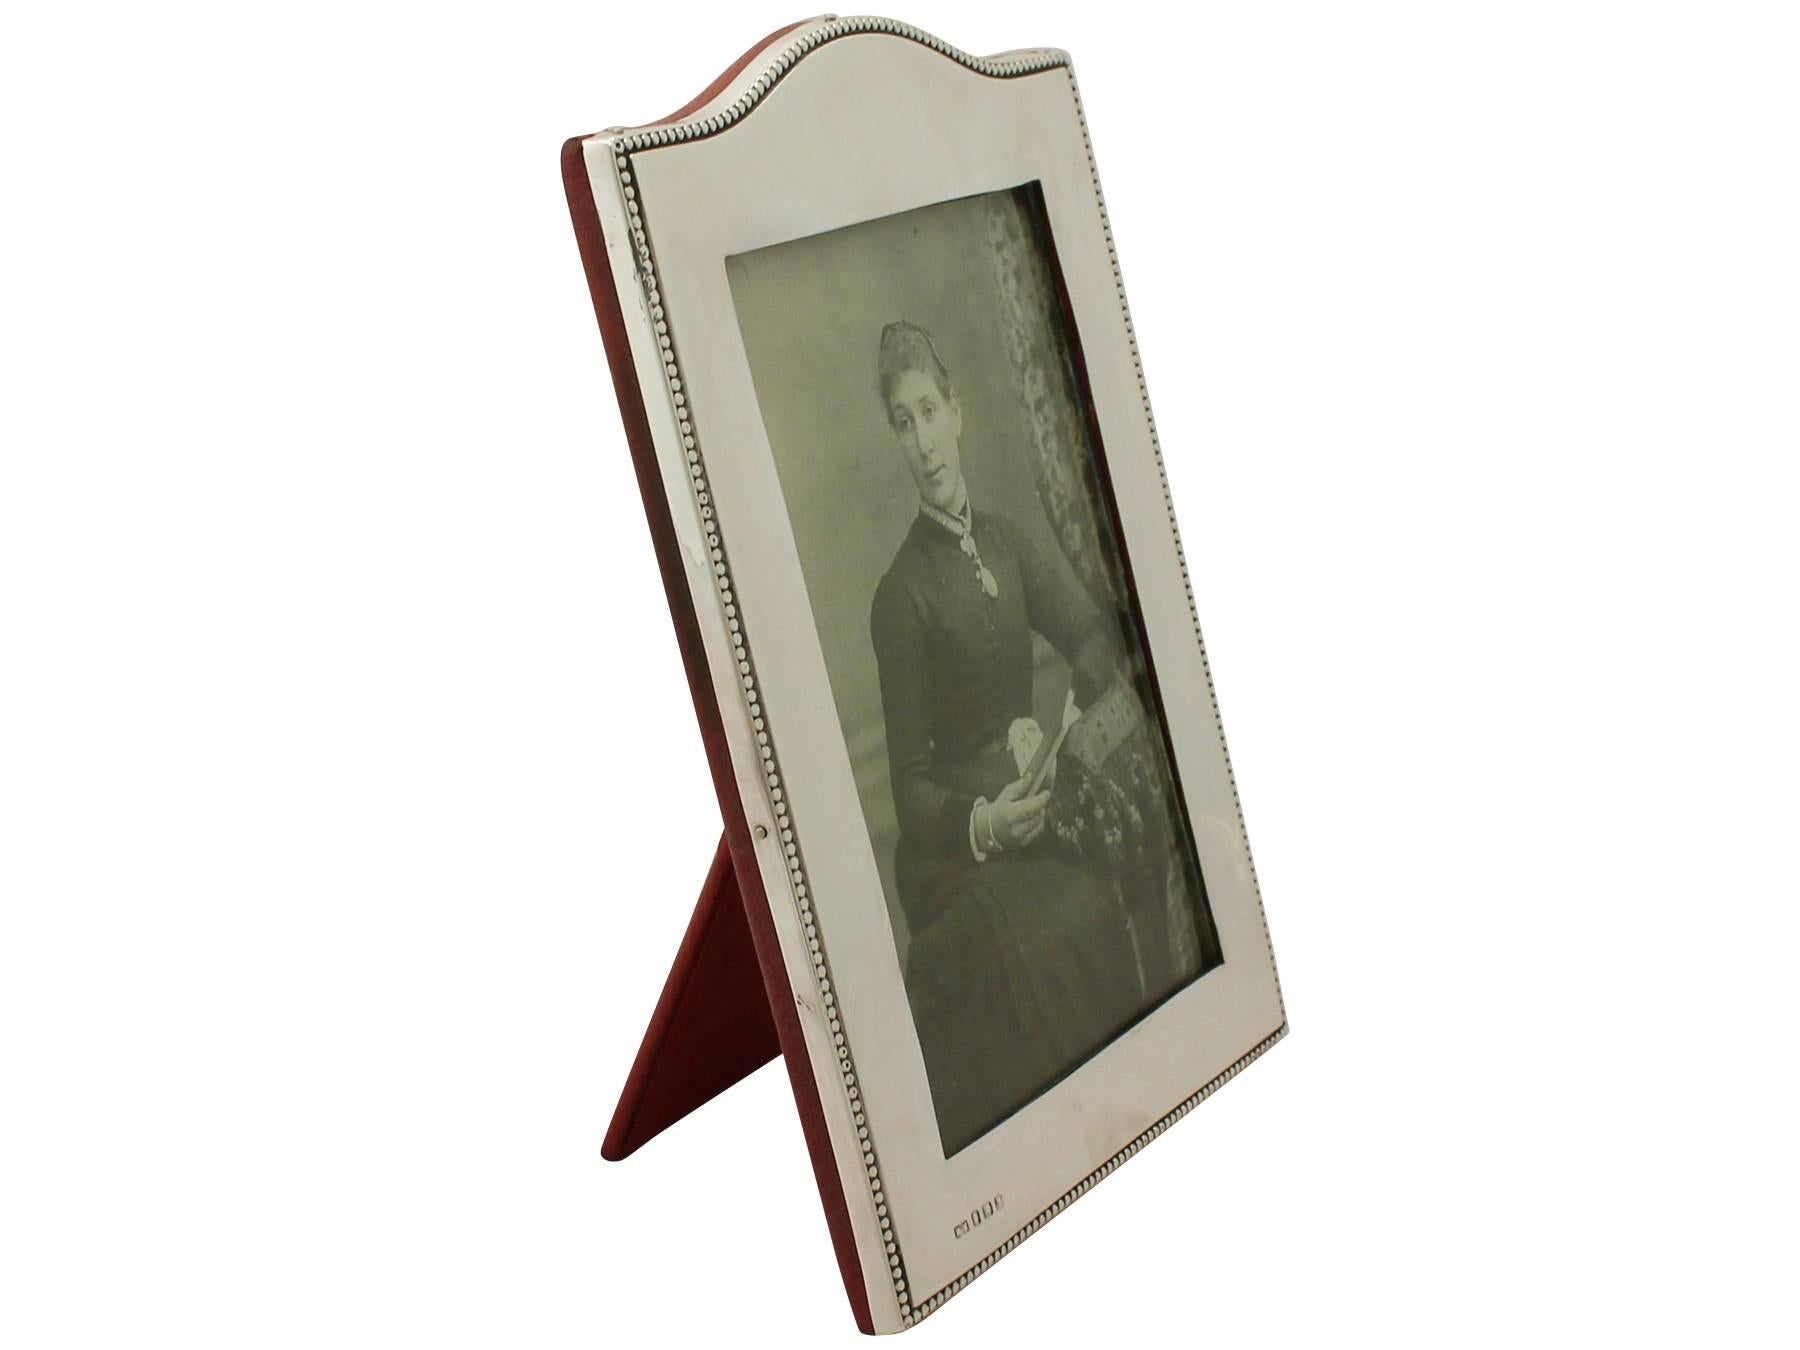 A fine and impressive antique George V English sterling silver photograph frame; an addition to our ornamental silverware collection.

This fine antique George V sterling silver photo frame has a rectangular form with domed upper portion and a